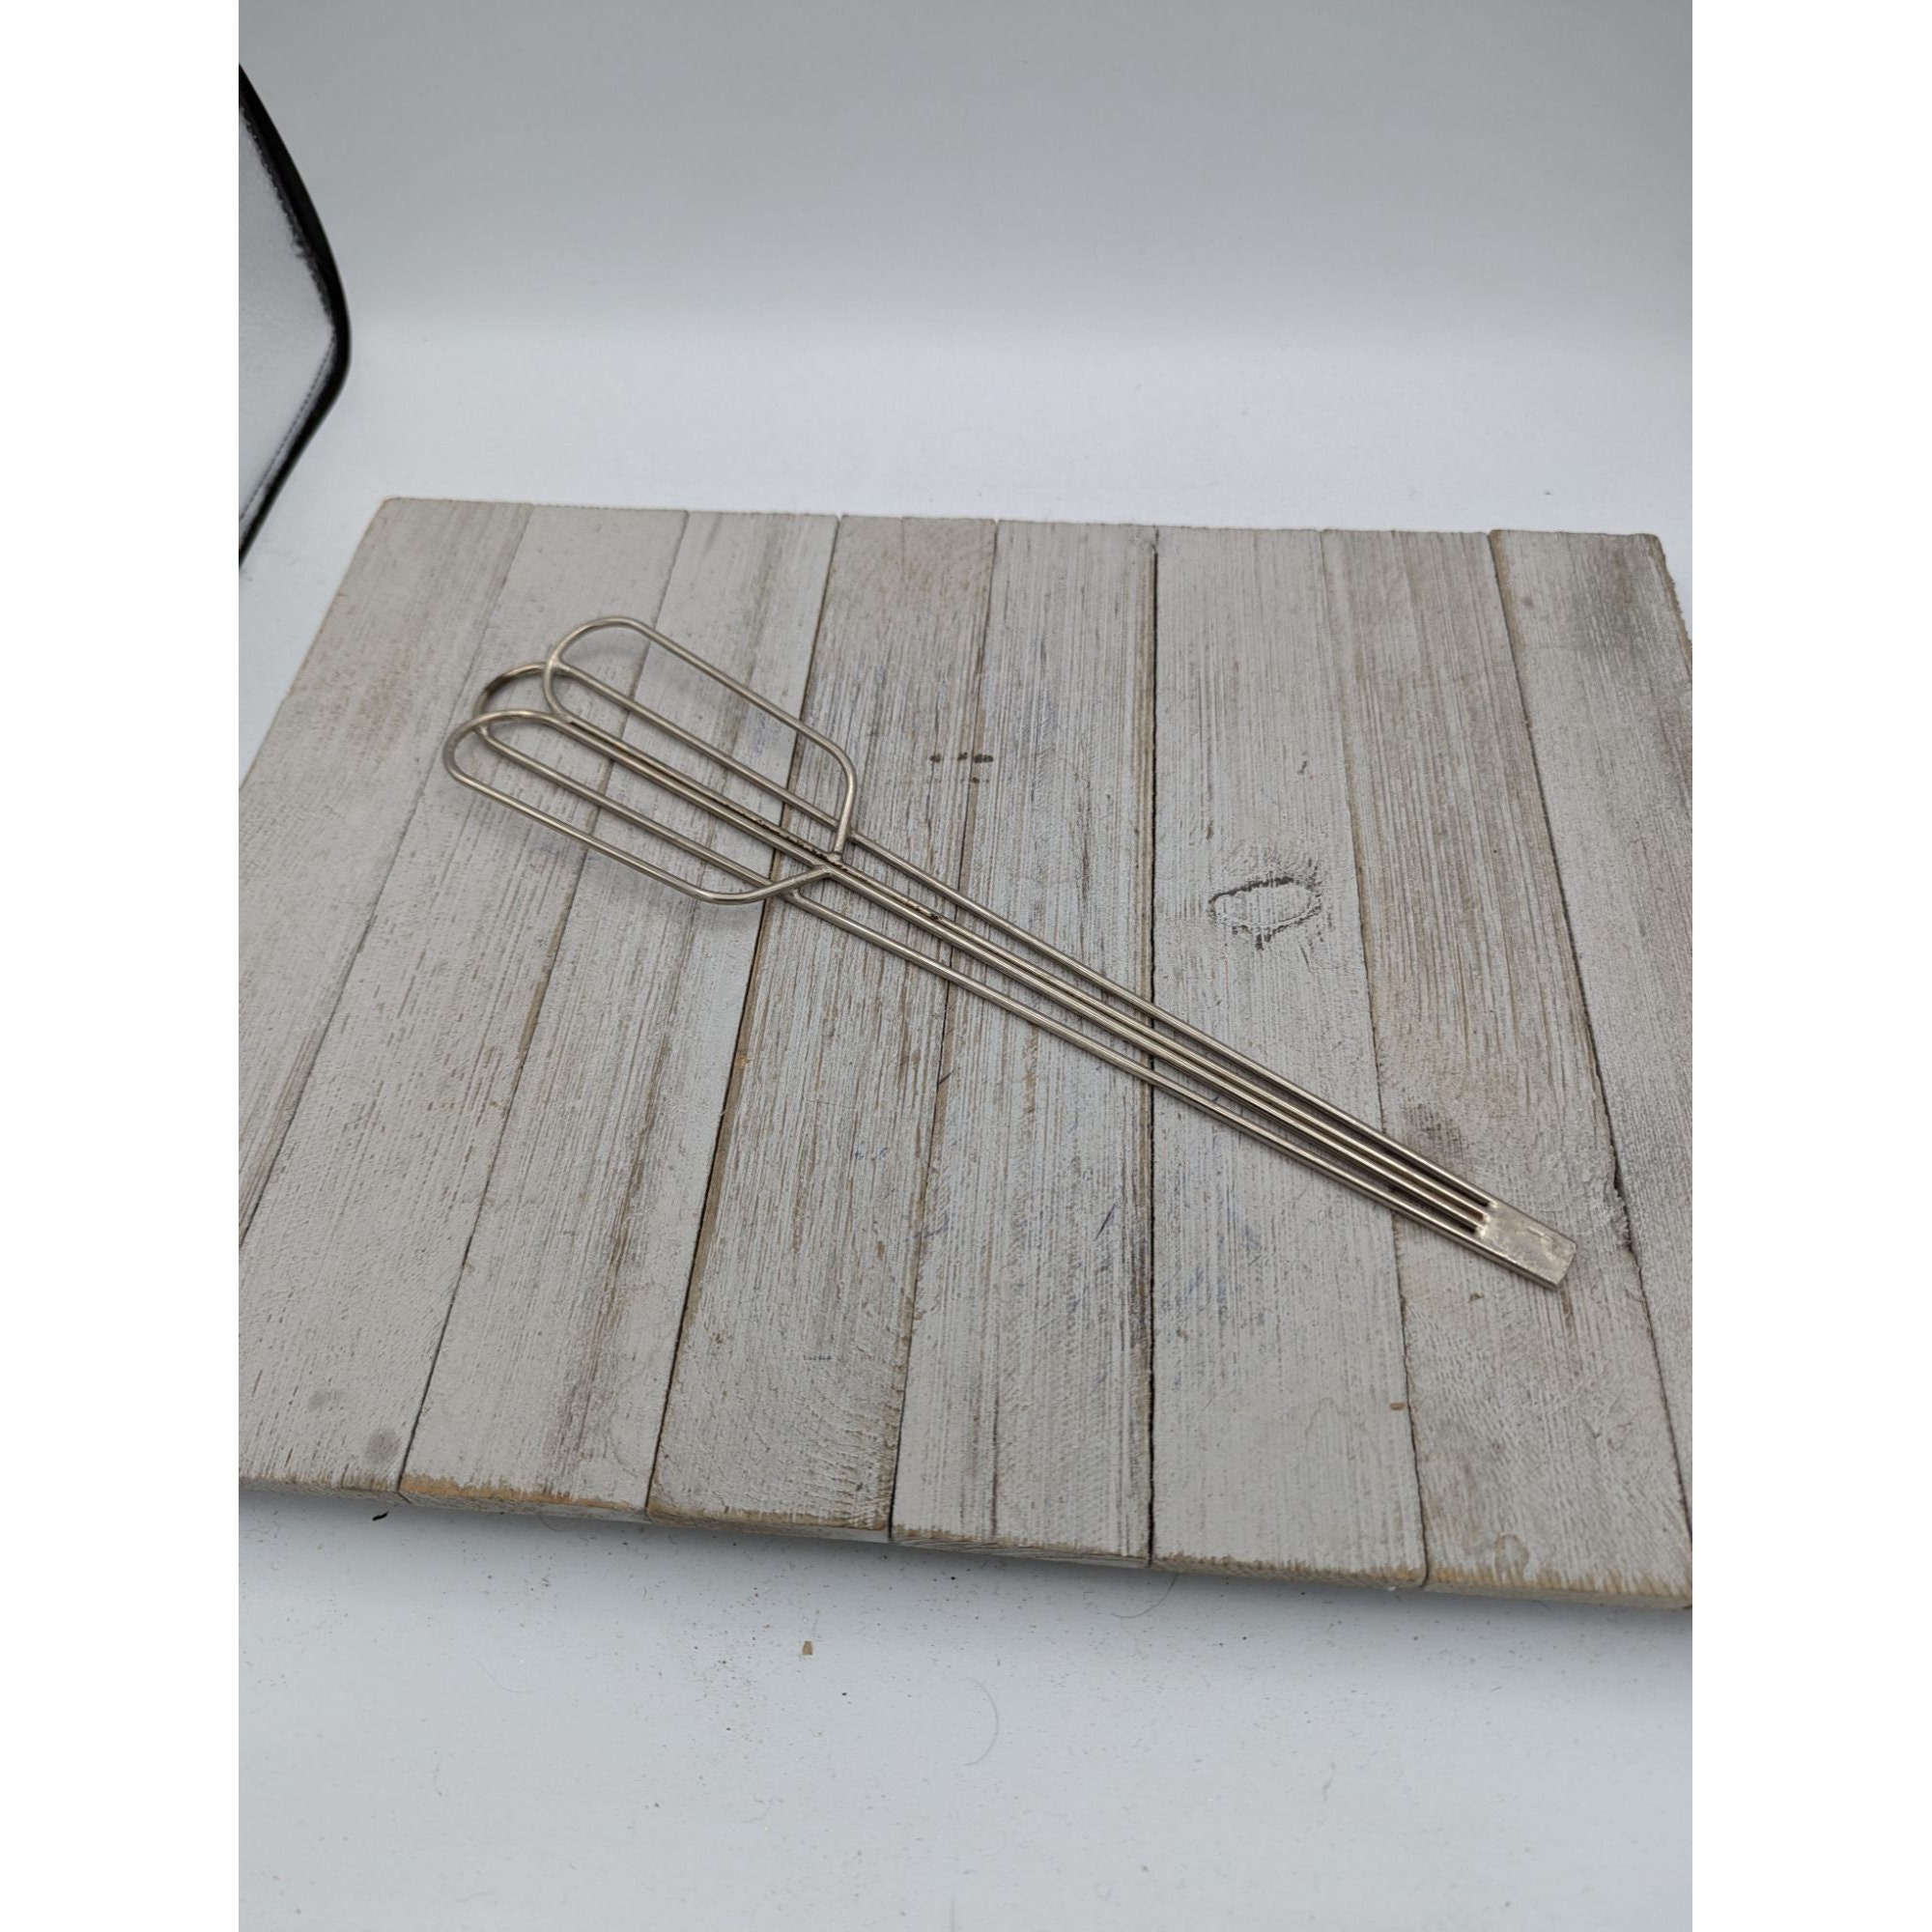  Linden Sweden Flat Wire Whisk – Unique Angled Head